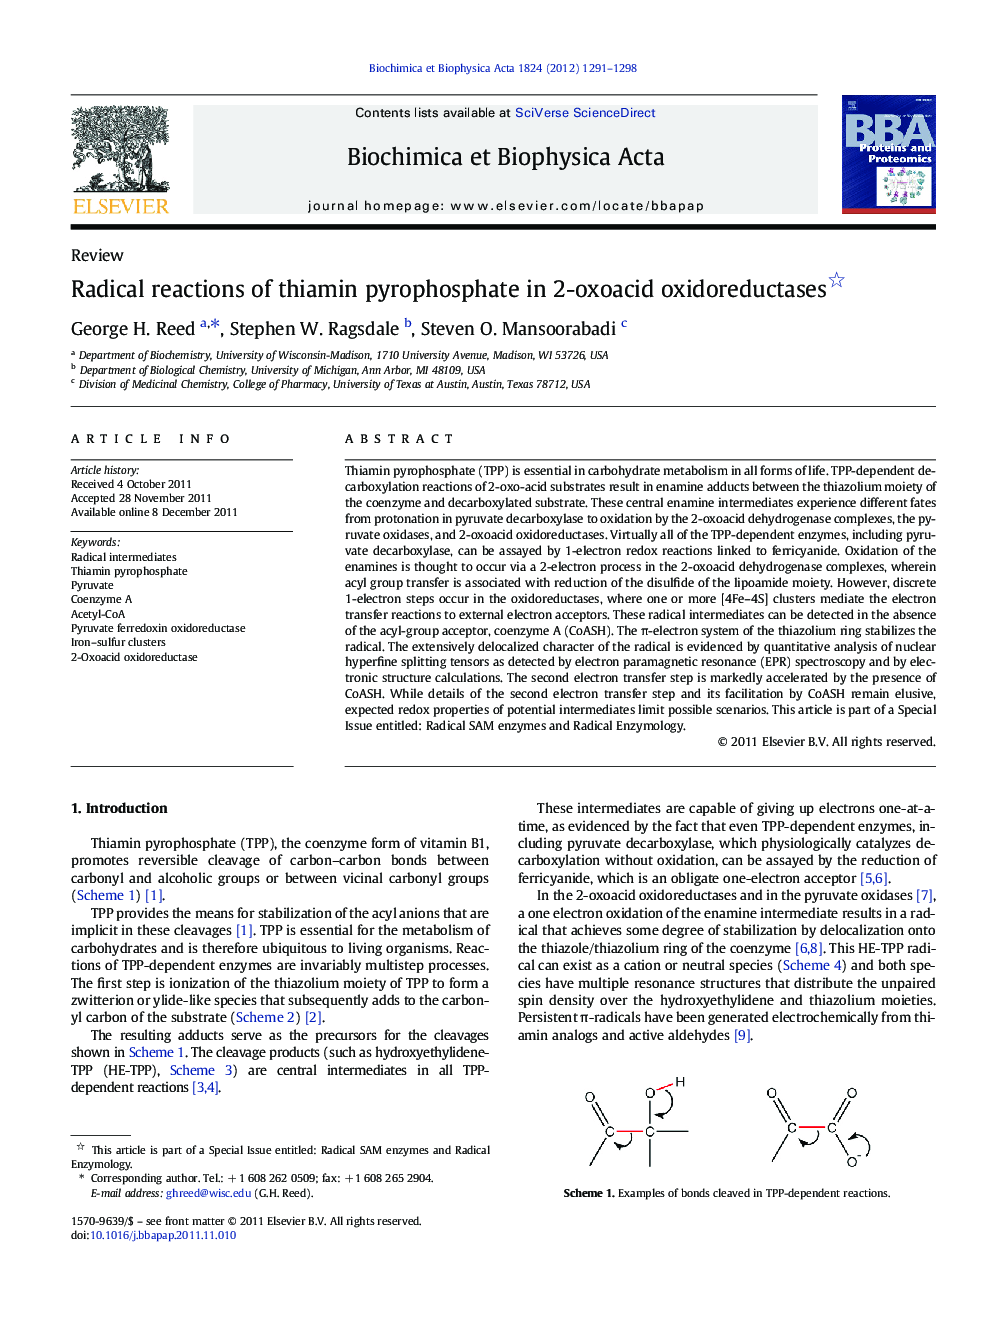 Radical reactions of thiamin pyrophosphate in 2-oxoacid oxidoreductases 